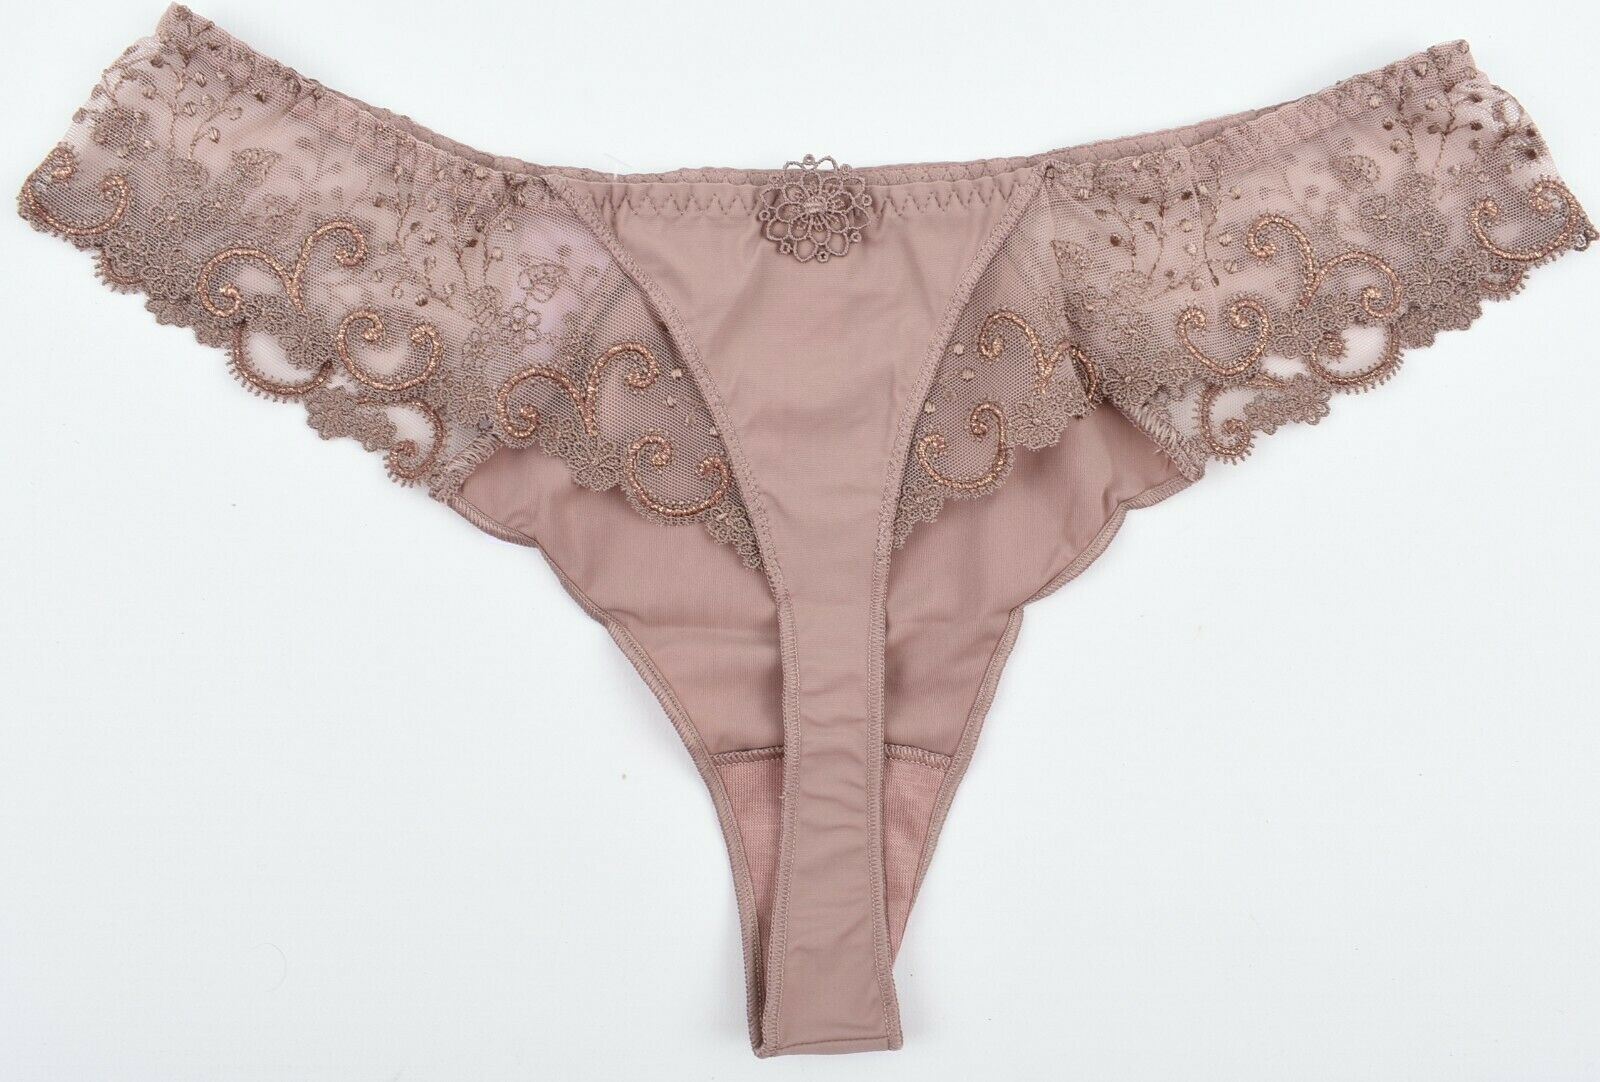 SIMONE PERELE Women's Lace Detail THONGS Knickers Taupe Brown, size M